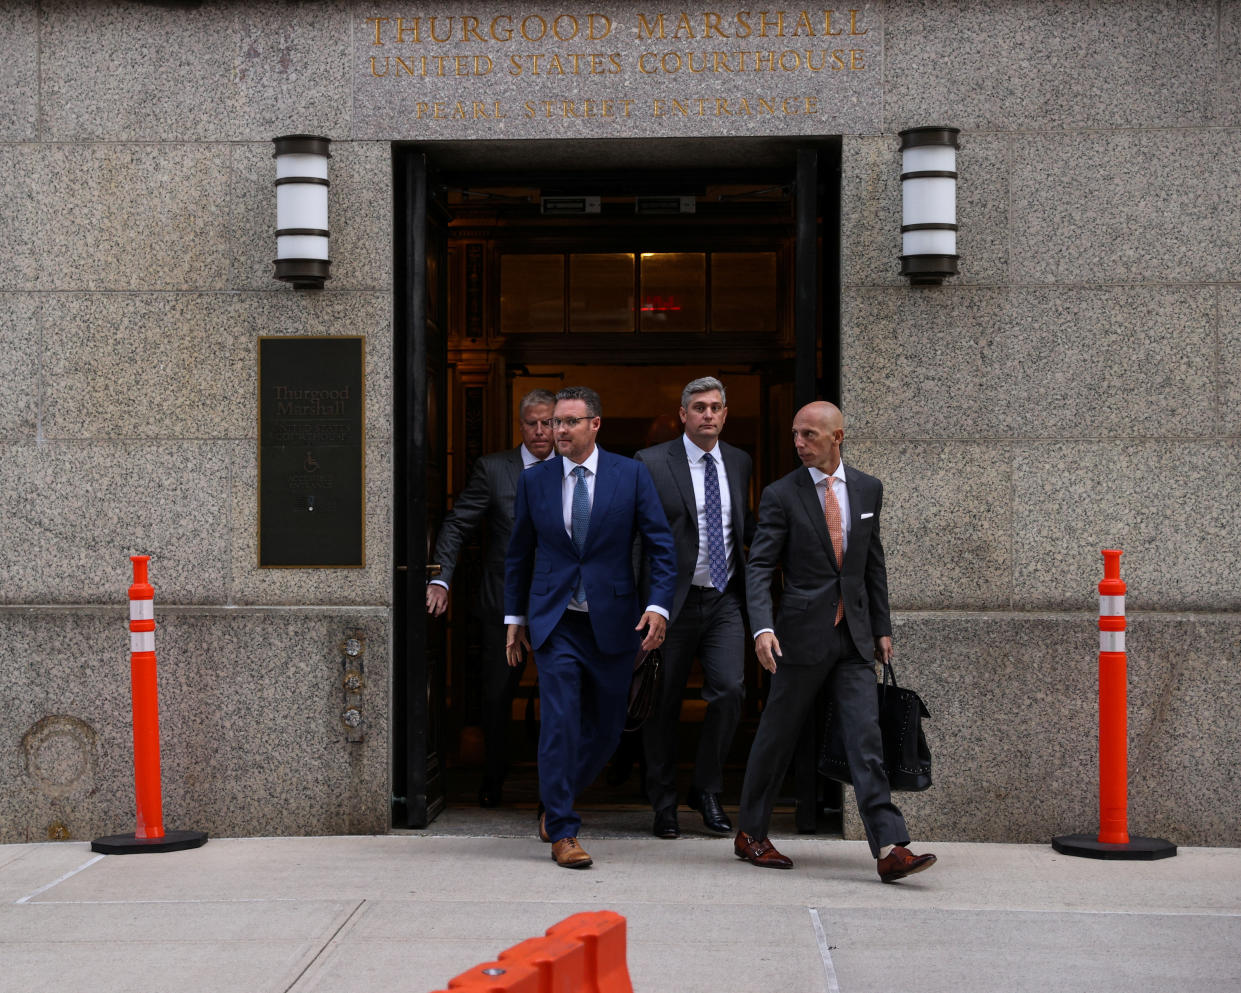 Trevor Milton, founder and former-CEO of Nikola Corp., departs the Thurgood Marshall United States Courthouse in New York, U.S., September 12, 2022. REUTERS/Amr Alfiky